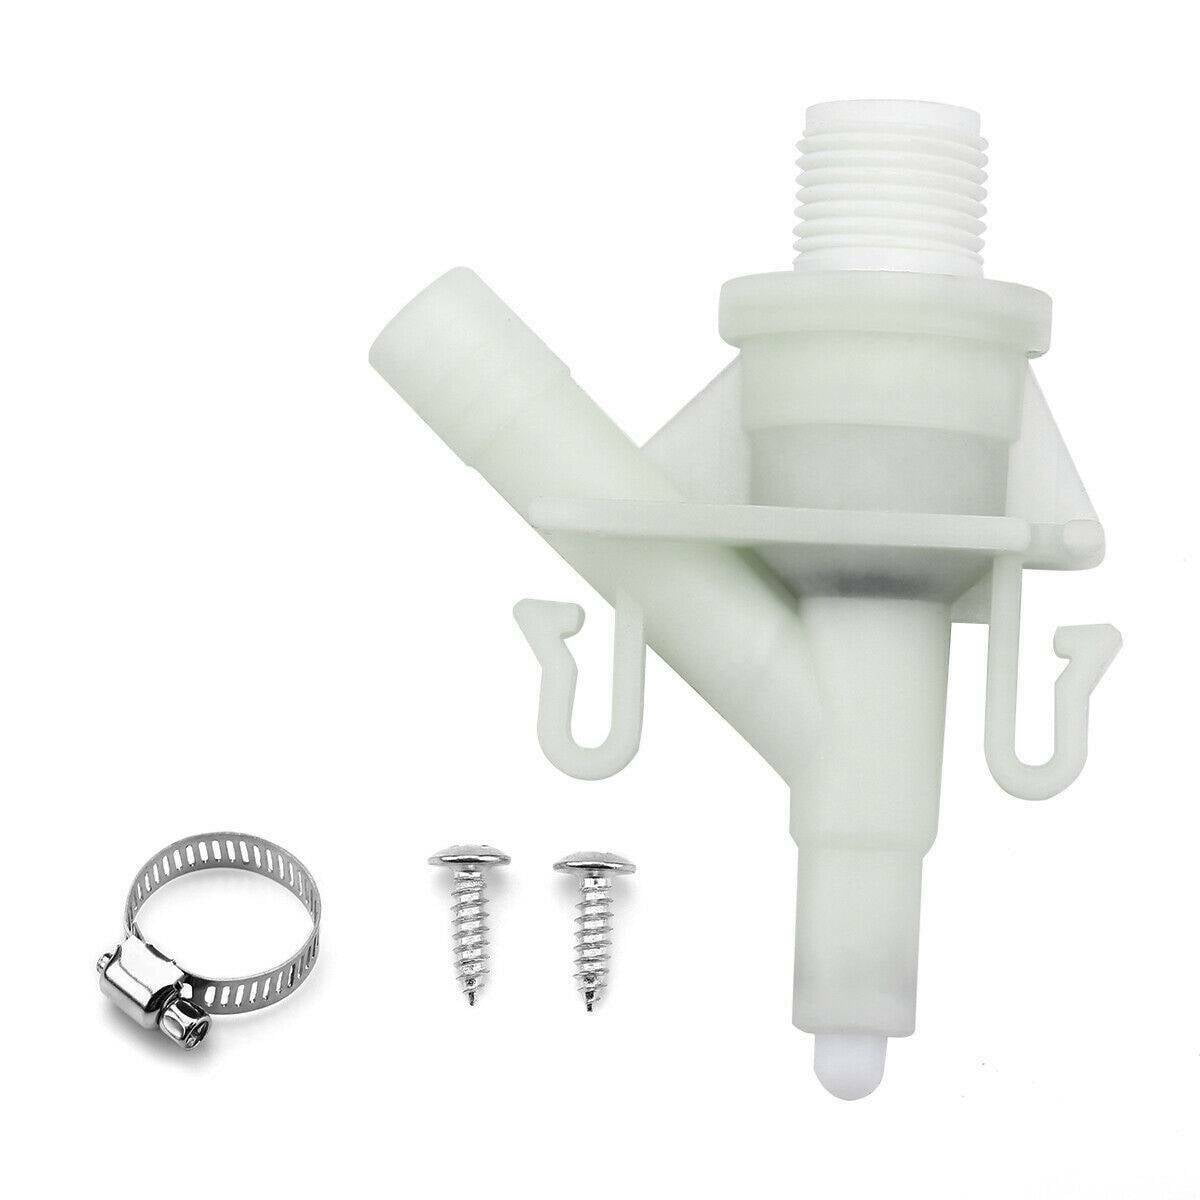 Upgraded for High Performance in Freezing Conditions Improved Valve Lifespan 310 Beech Lane Upgraded Water Valve Kit for Dometic Toilets 300 and 320 Compare to Dometic Toilet Valve 385311641 